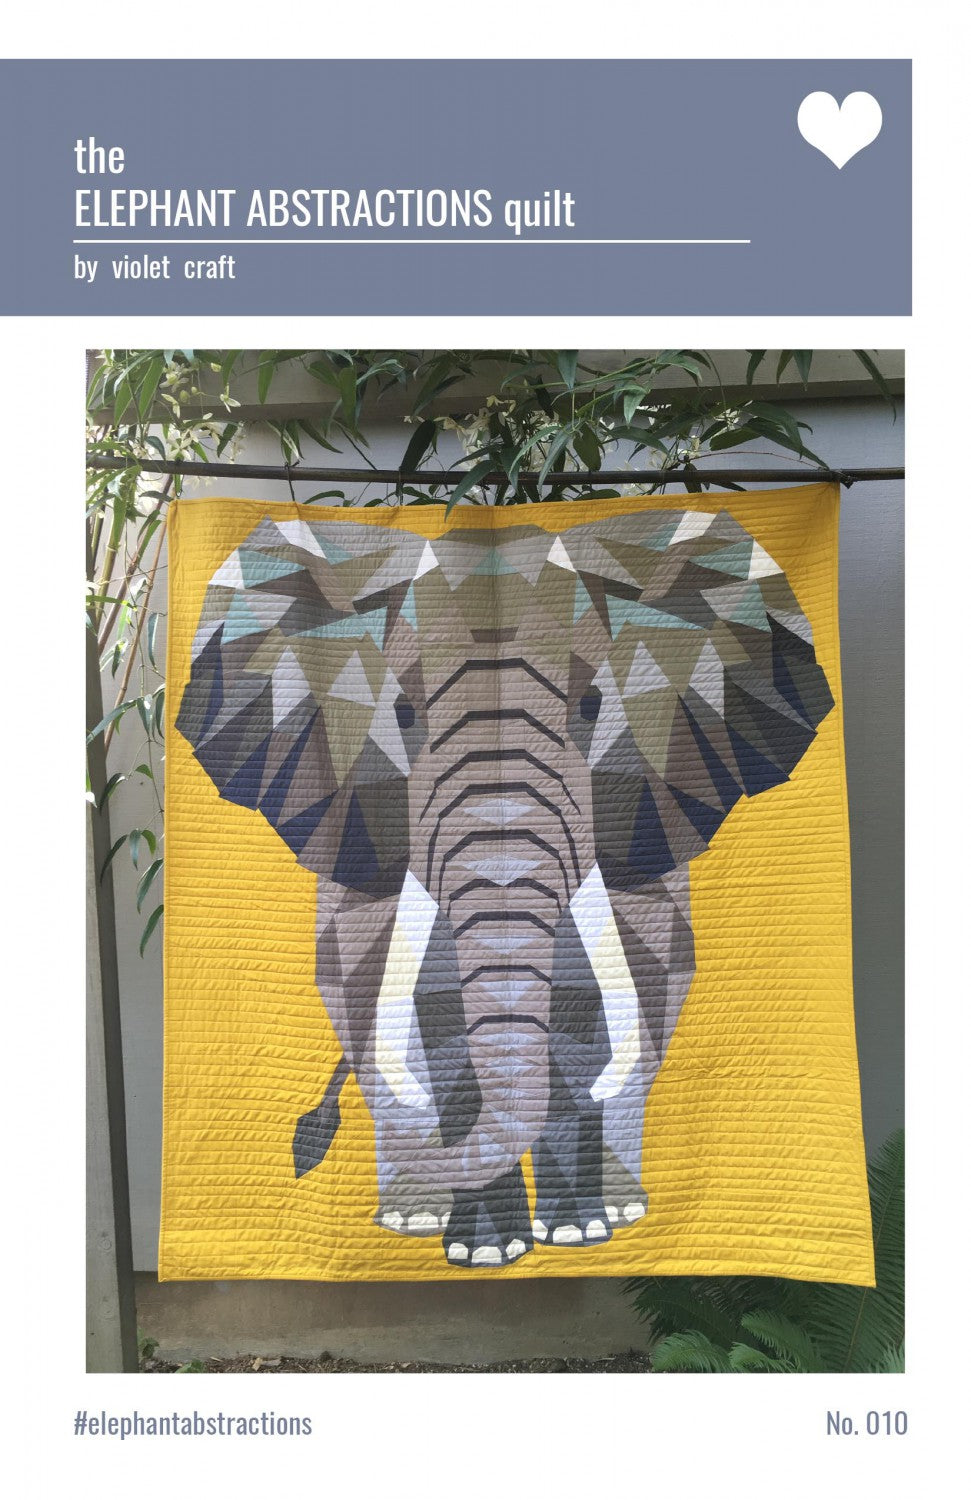 The Elephant Abstractions 54-Inch x 60-Inch Foundation Paper Pieced Quilt Pattern by Violet Craft